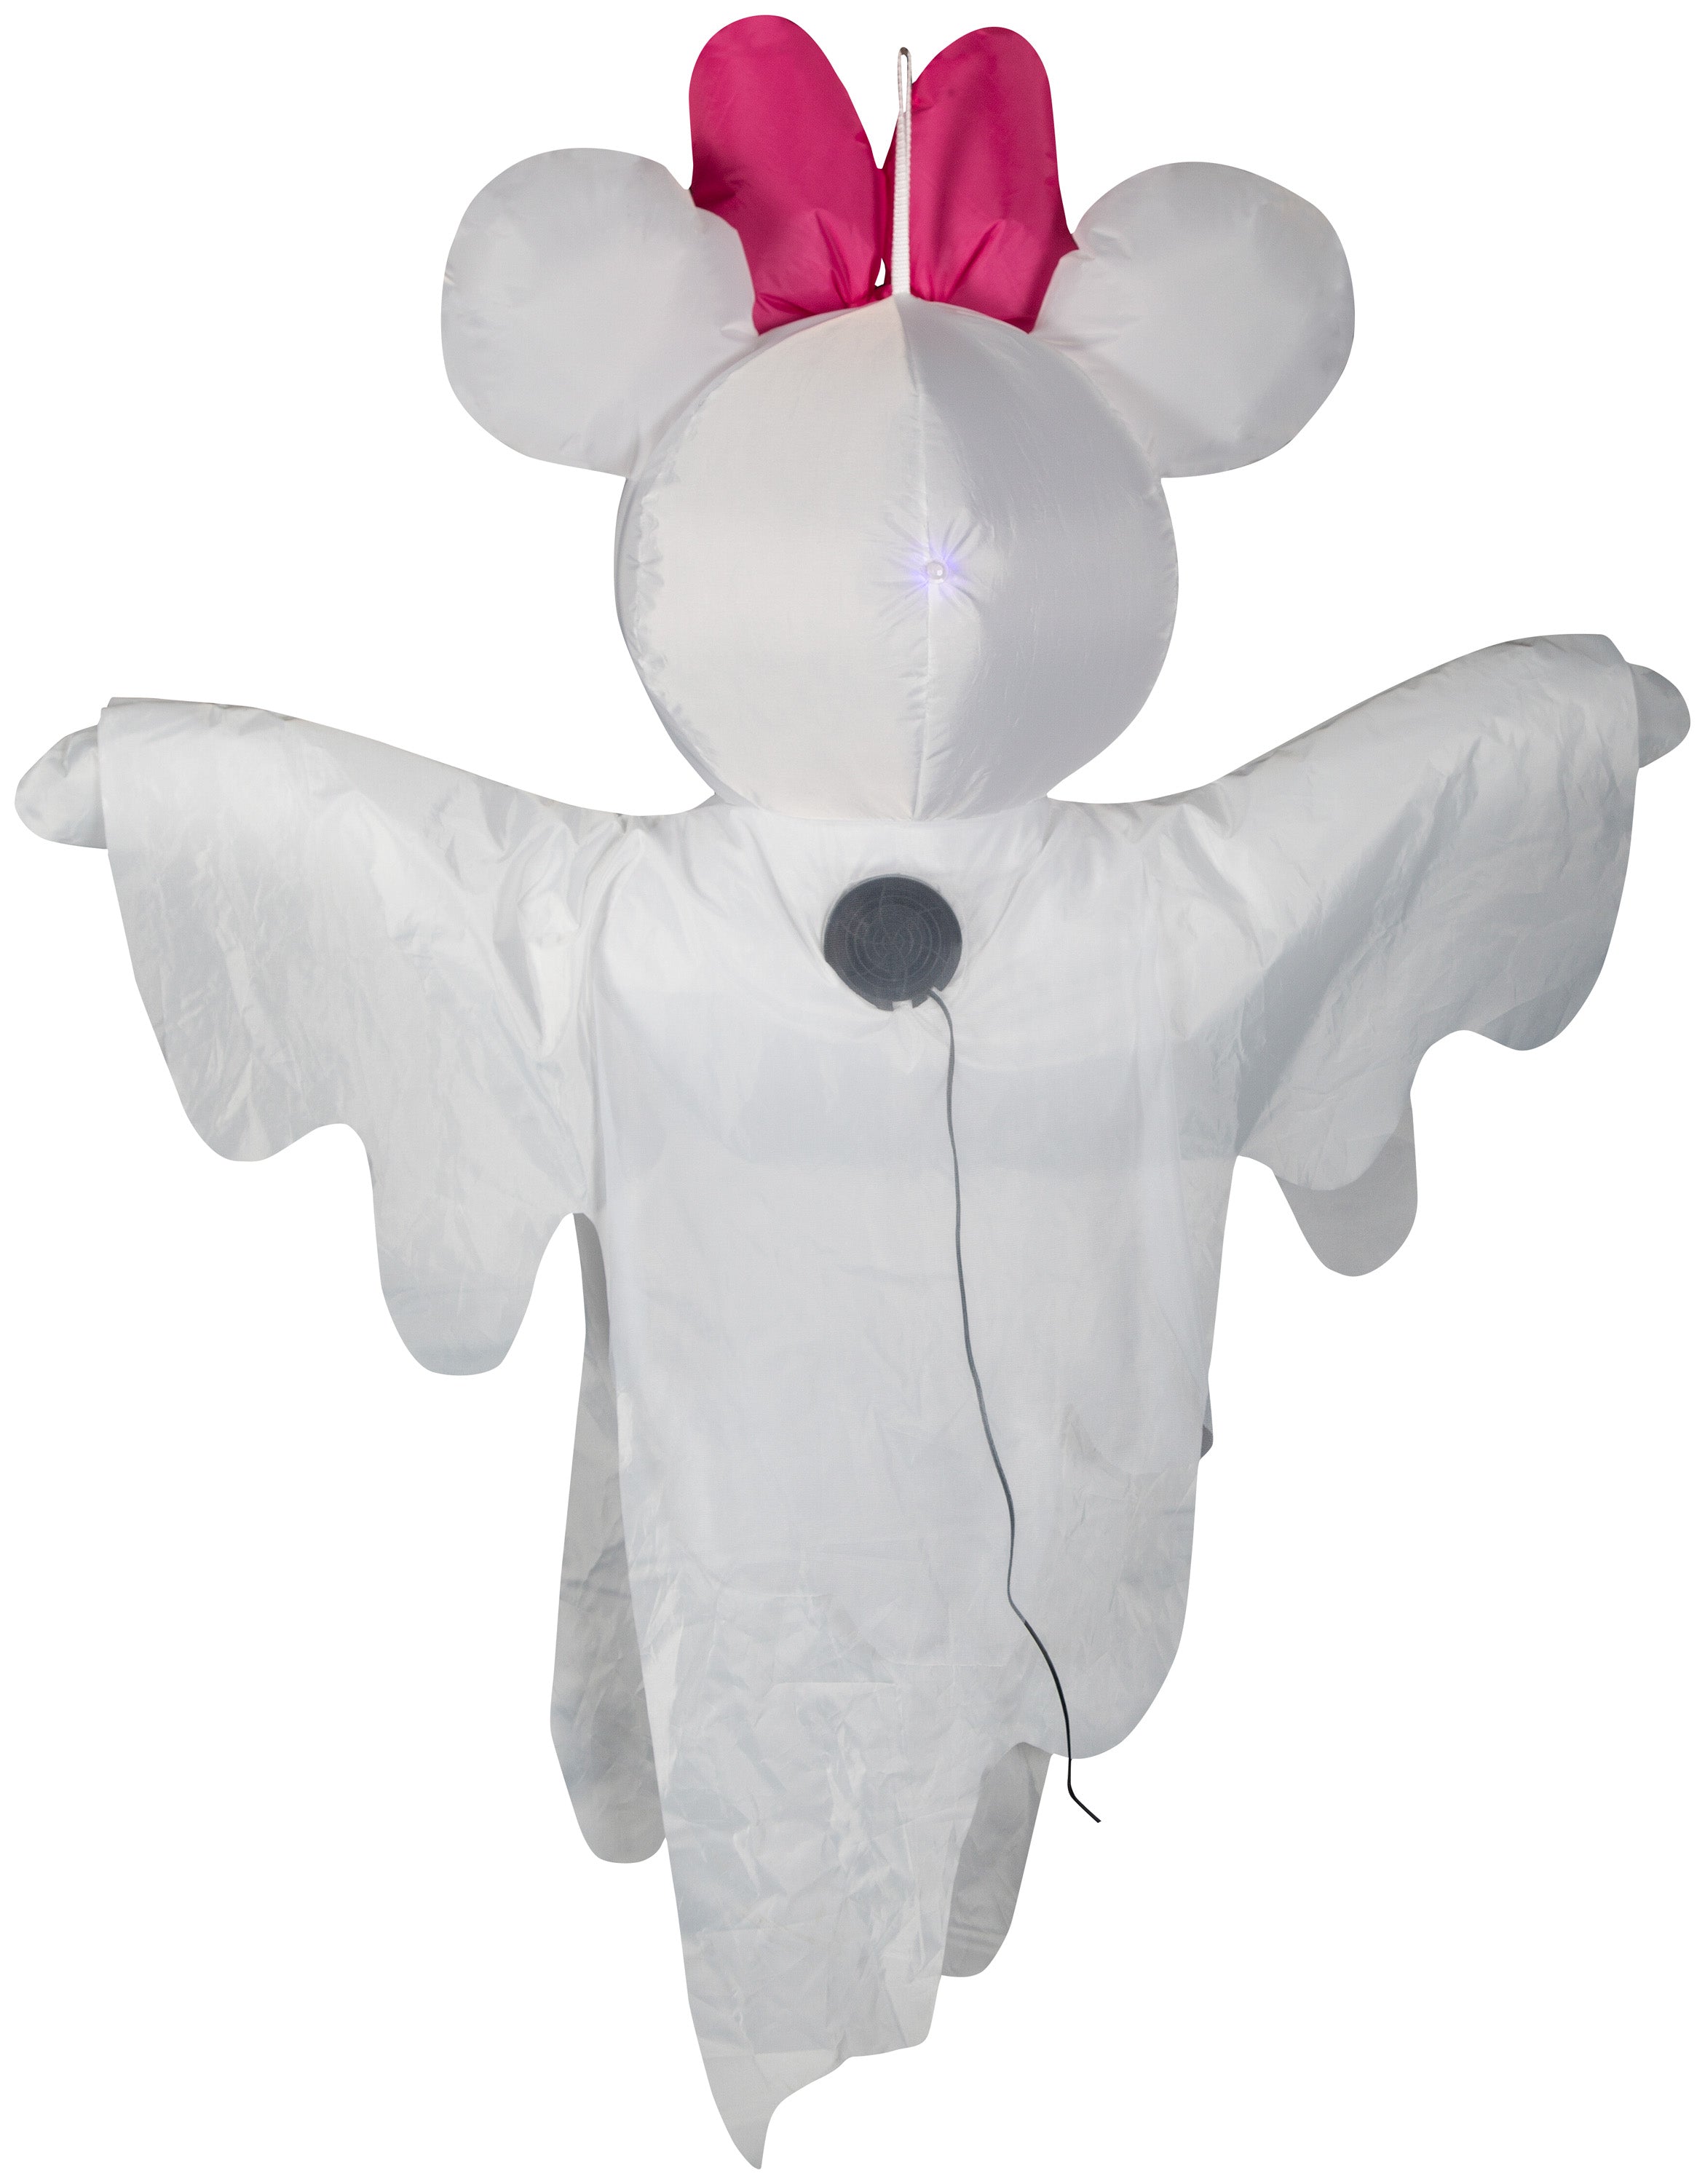 Gemmy Airblown Hanging Minnie Mouse Disney, 4 ft Tall, White